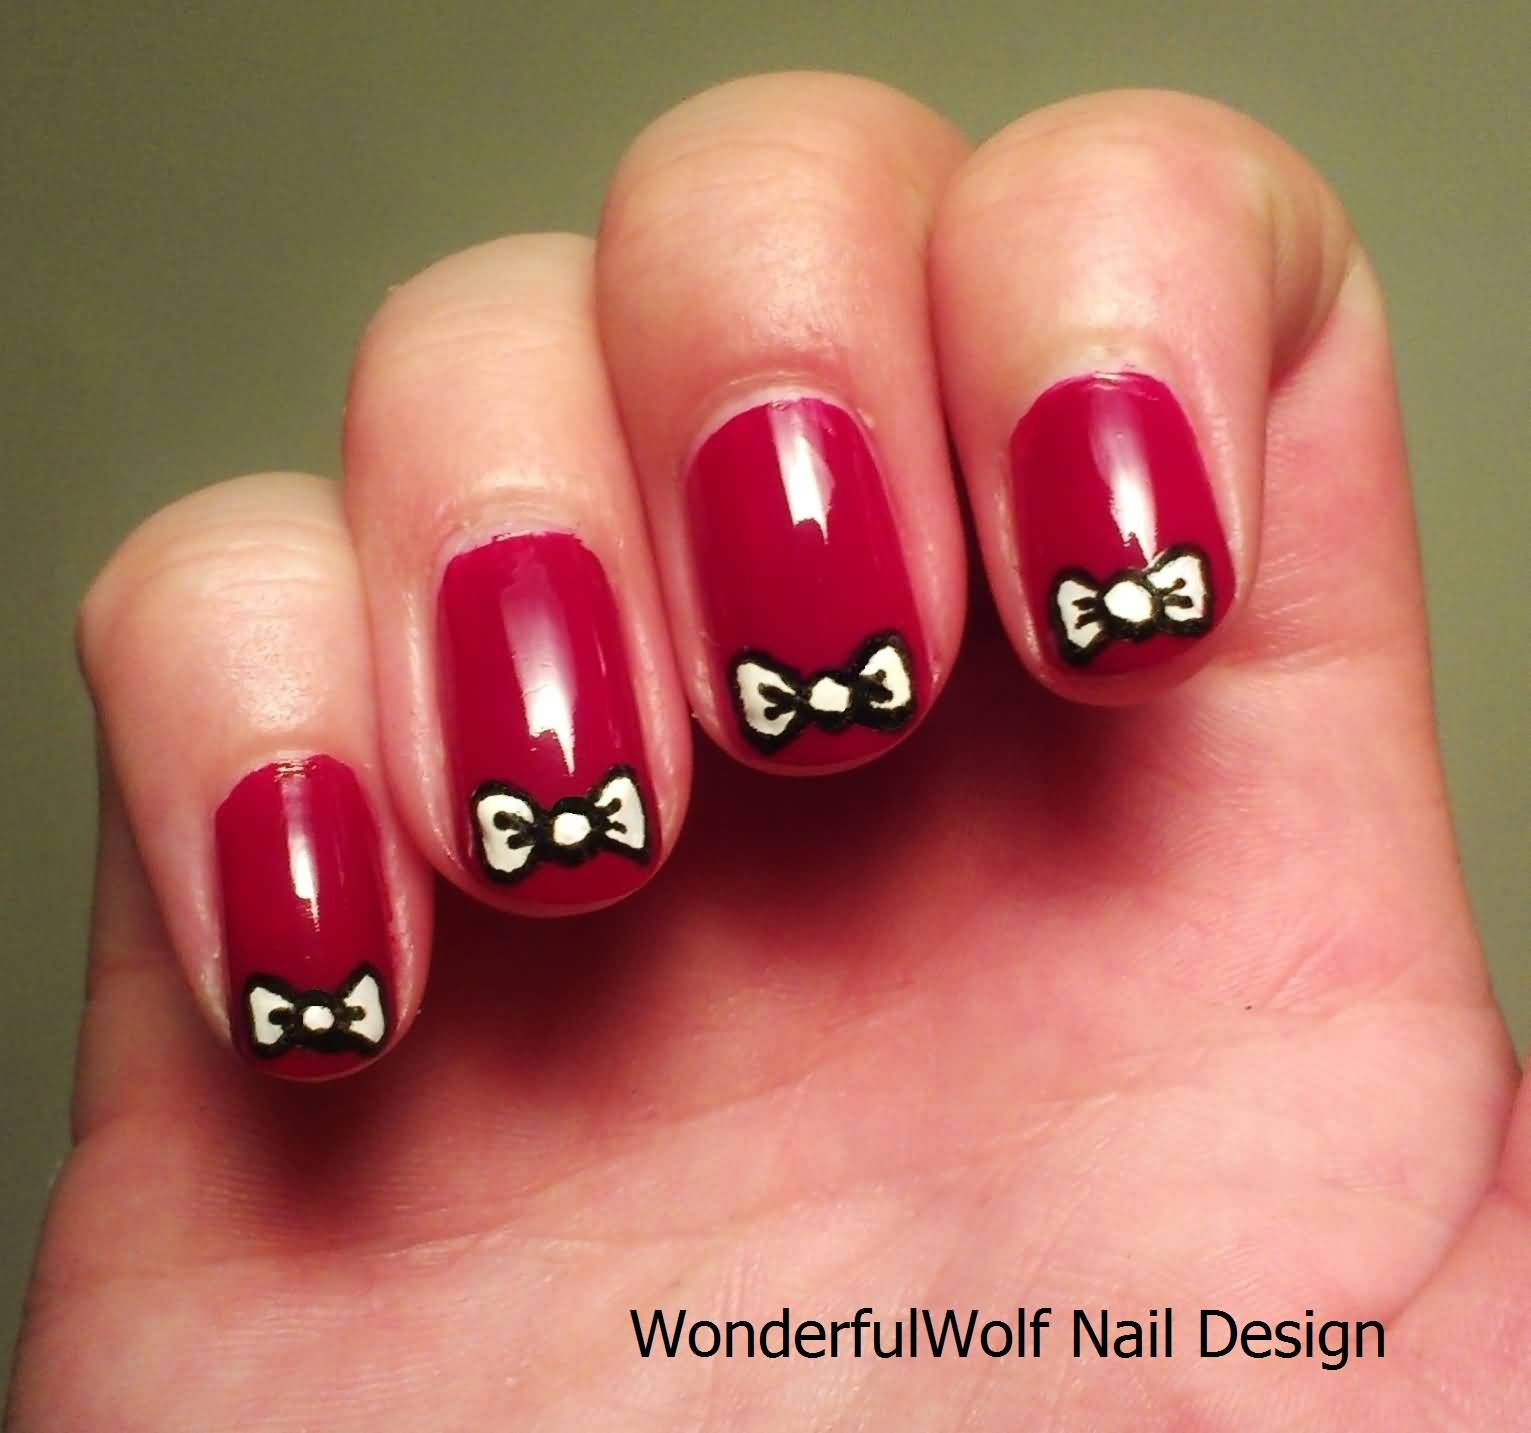 Red Glossy Nails With White Bow Nail Art